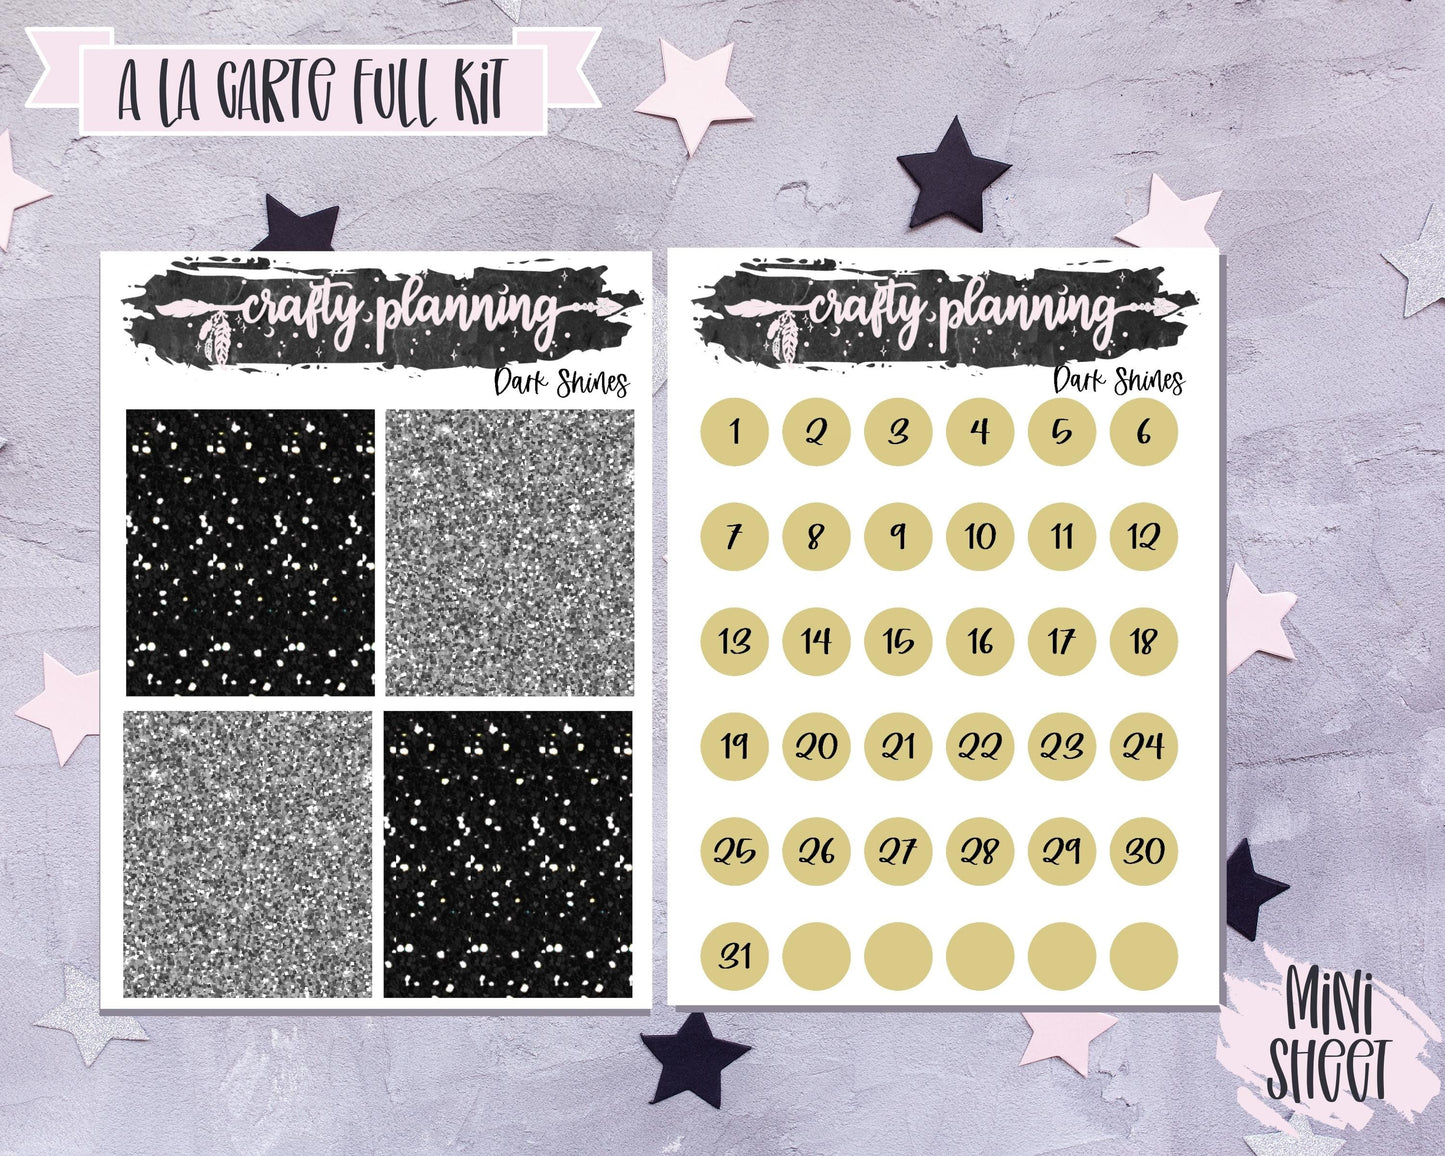 Gothic Stickers, Vertical Planner, Weekly Planner Kit, Planner Stickers, Goth Stickers, Dark Stickers, Witchcraft Stickers, Journal Kit